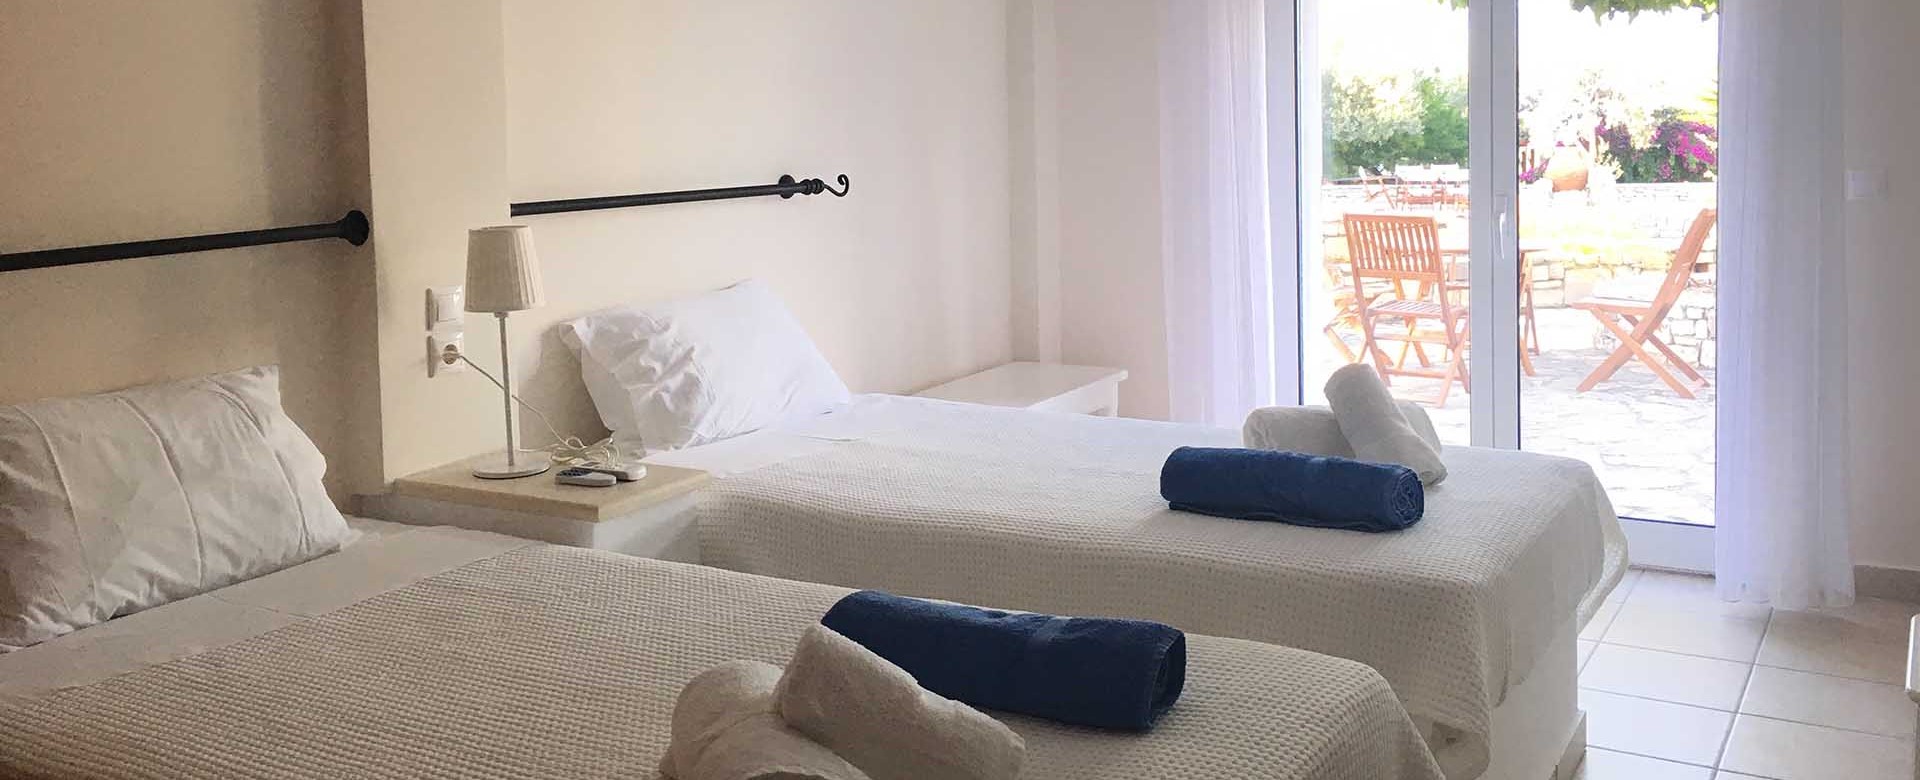 Bedroom with single beds and French doors opening onto the patio at Casa Elena, Melissani Apartments, Karavomilos, Kefalonia, Greek Islands